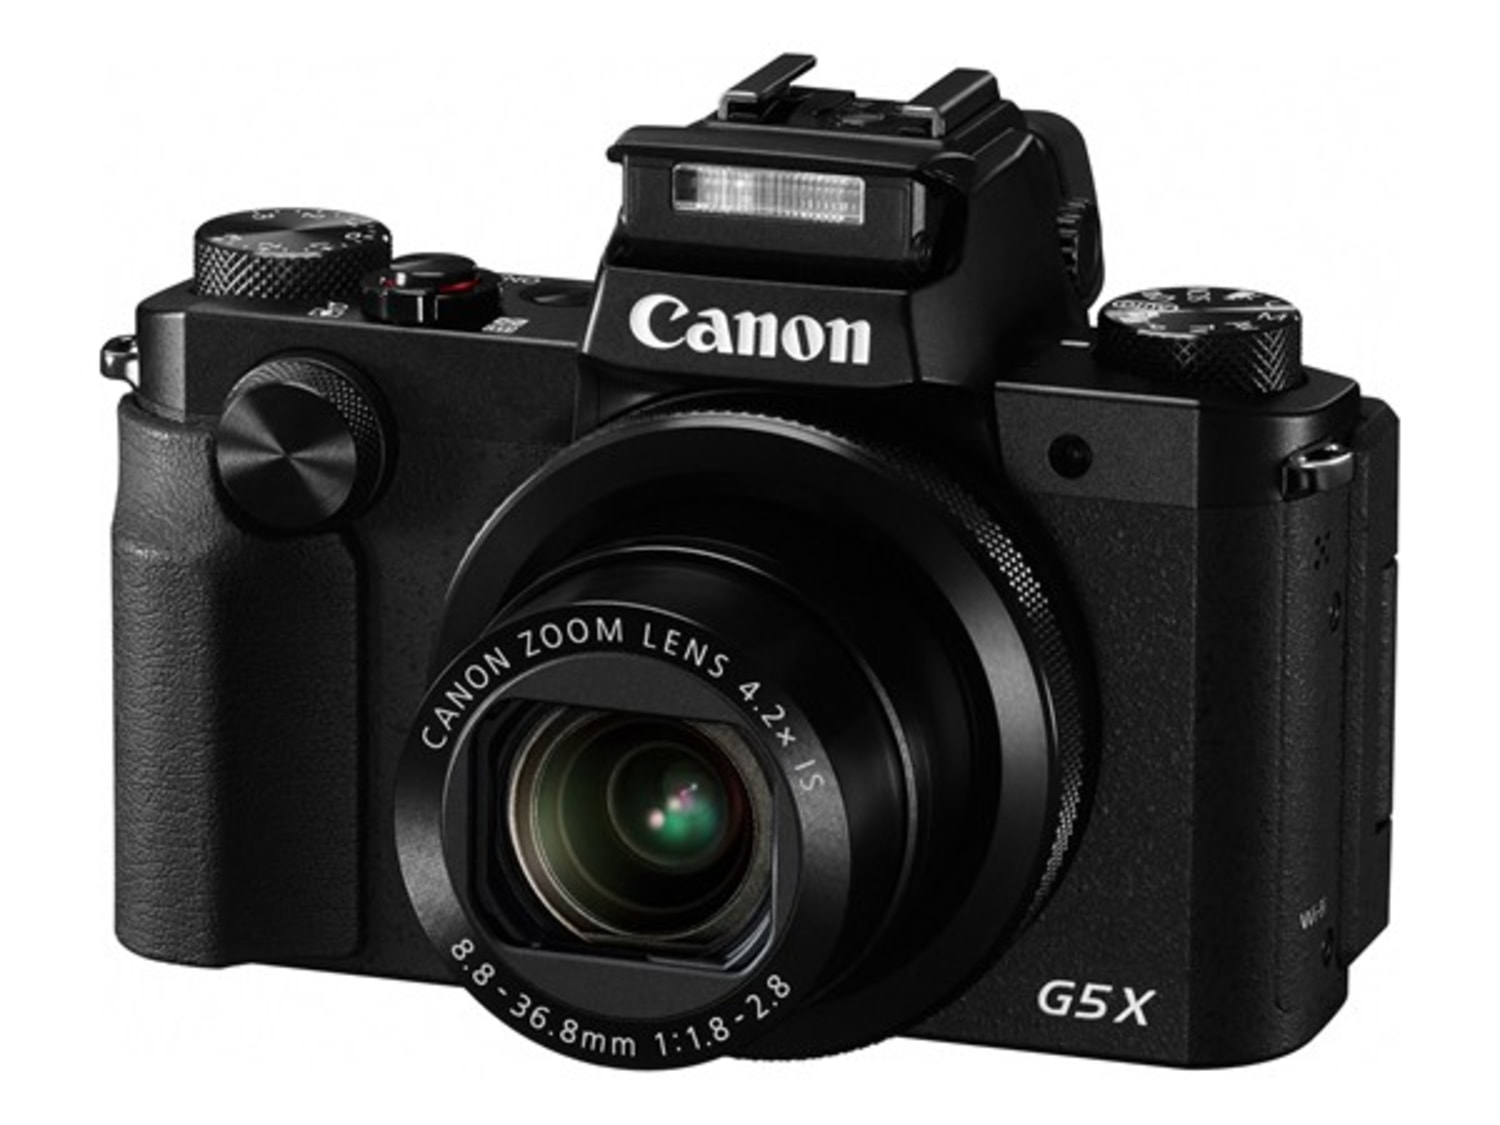 Amerika kiezen Telemacos Canon Updates Compact Camera Line With G5 X, G9 X and M10